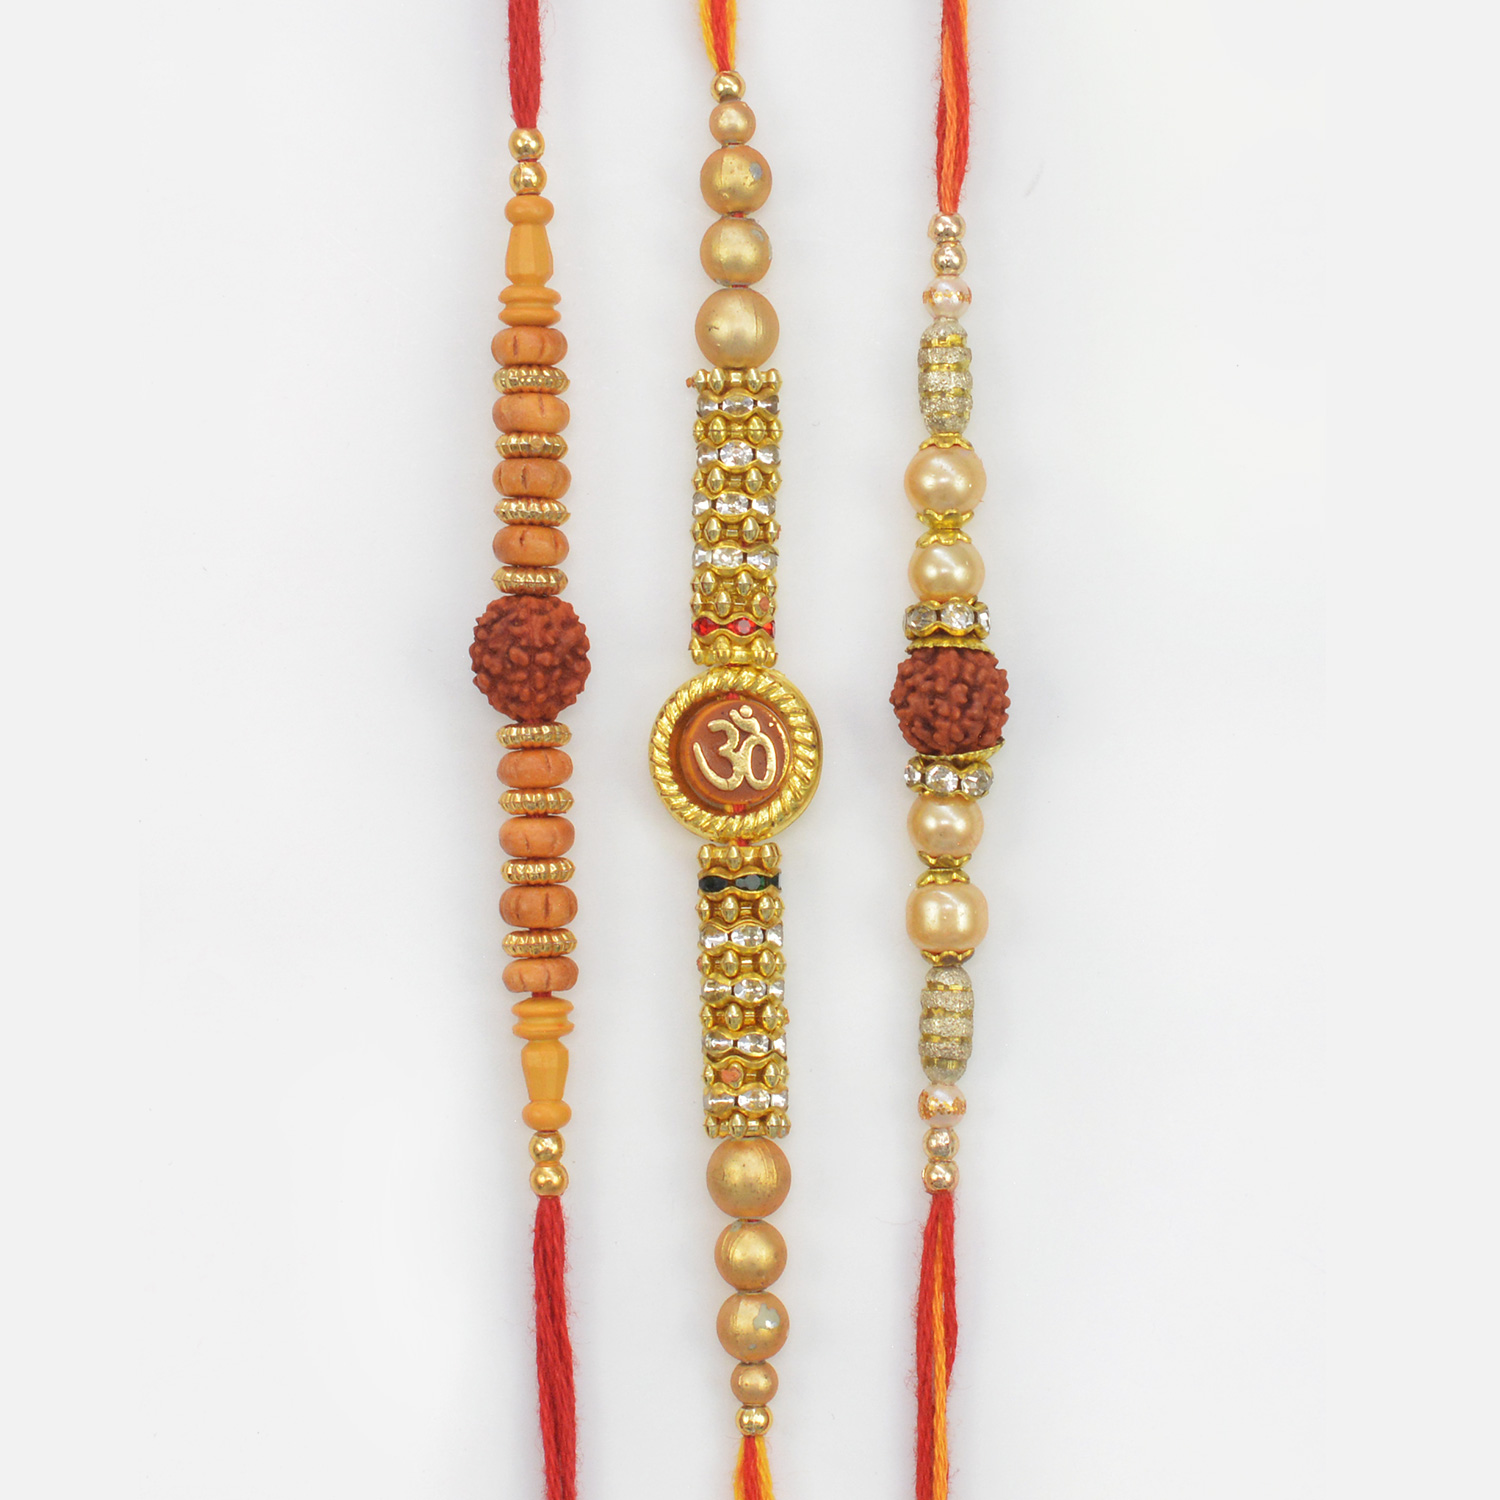 Rudraksha and Om Special Divine Thread Amazing Rakhis for 3 Brothers